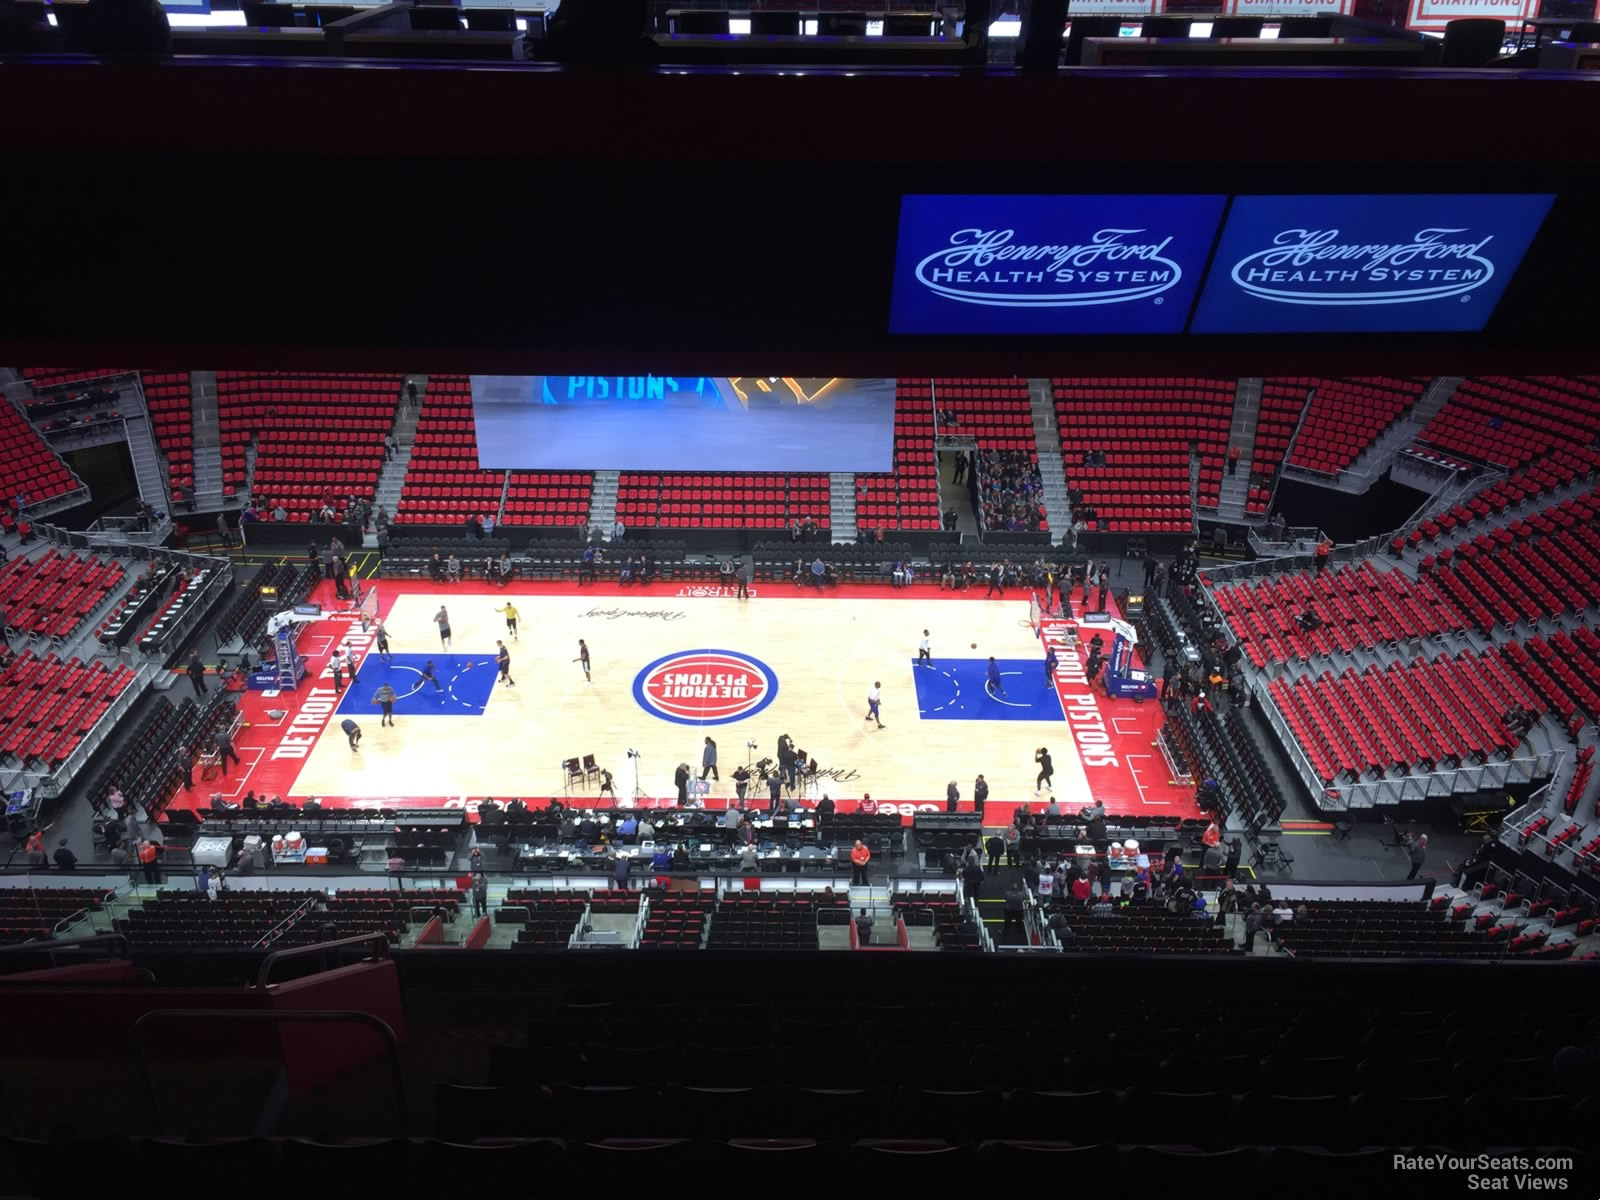 section 226, row 12 seat view  for basketball - little caesars arena